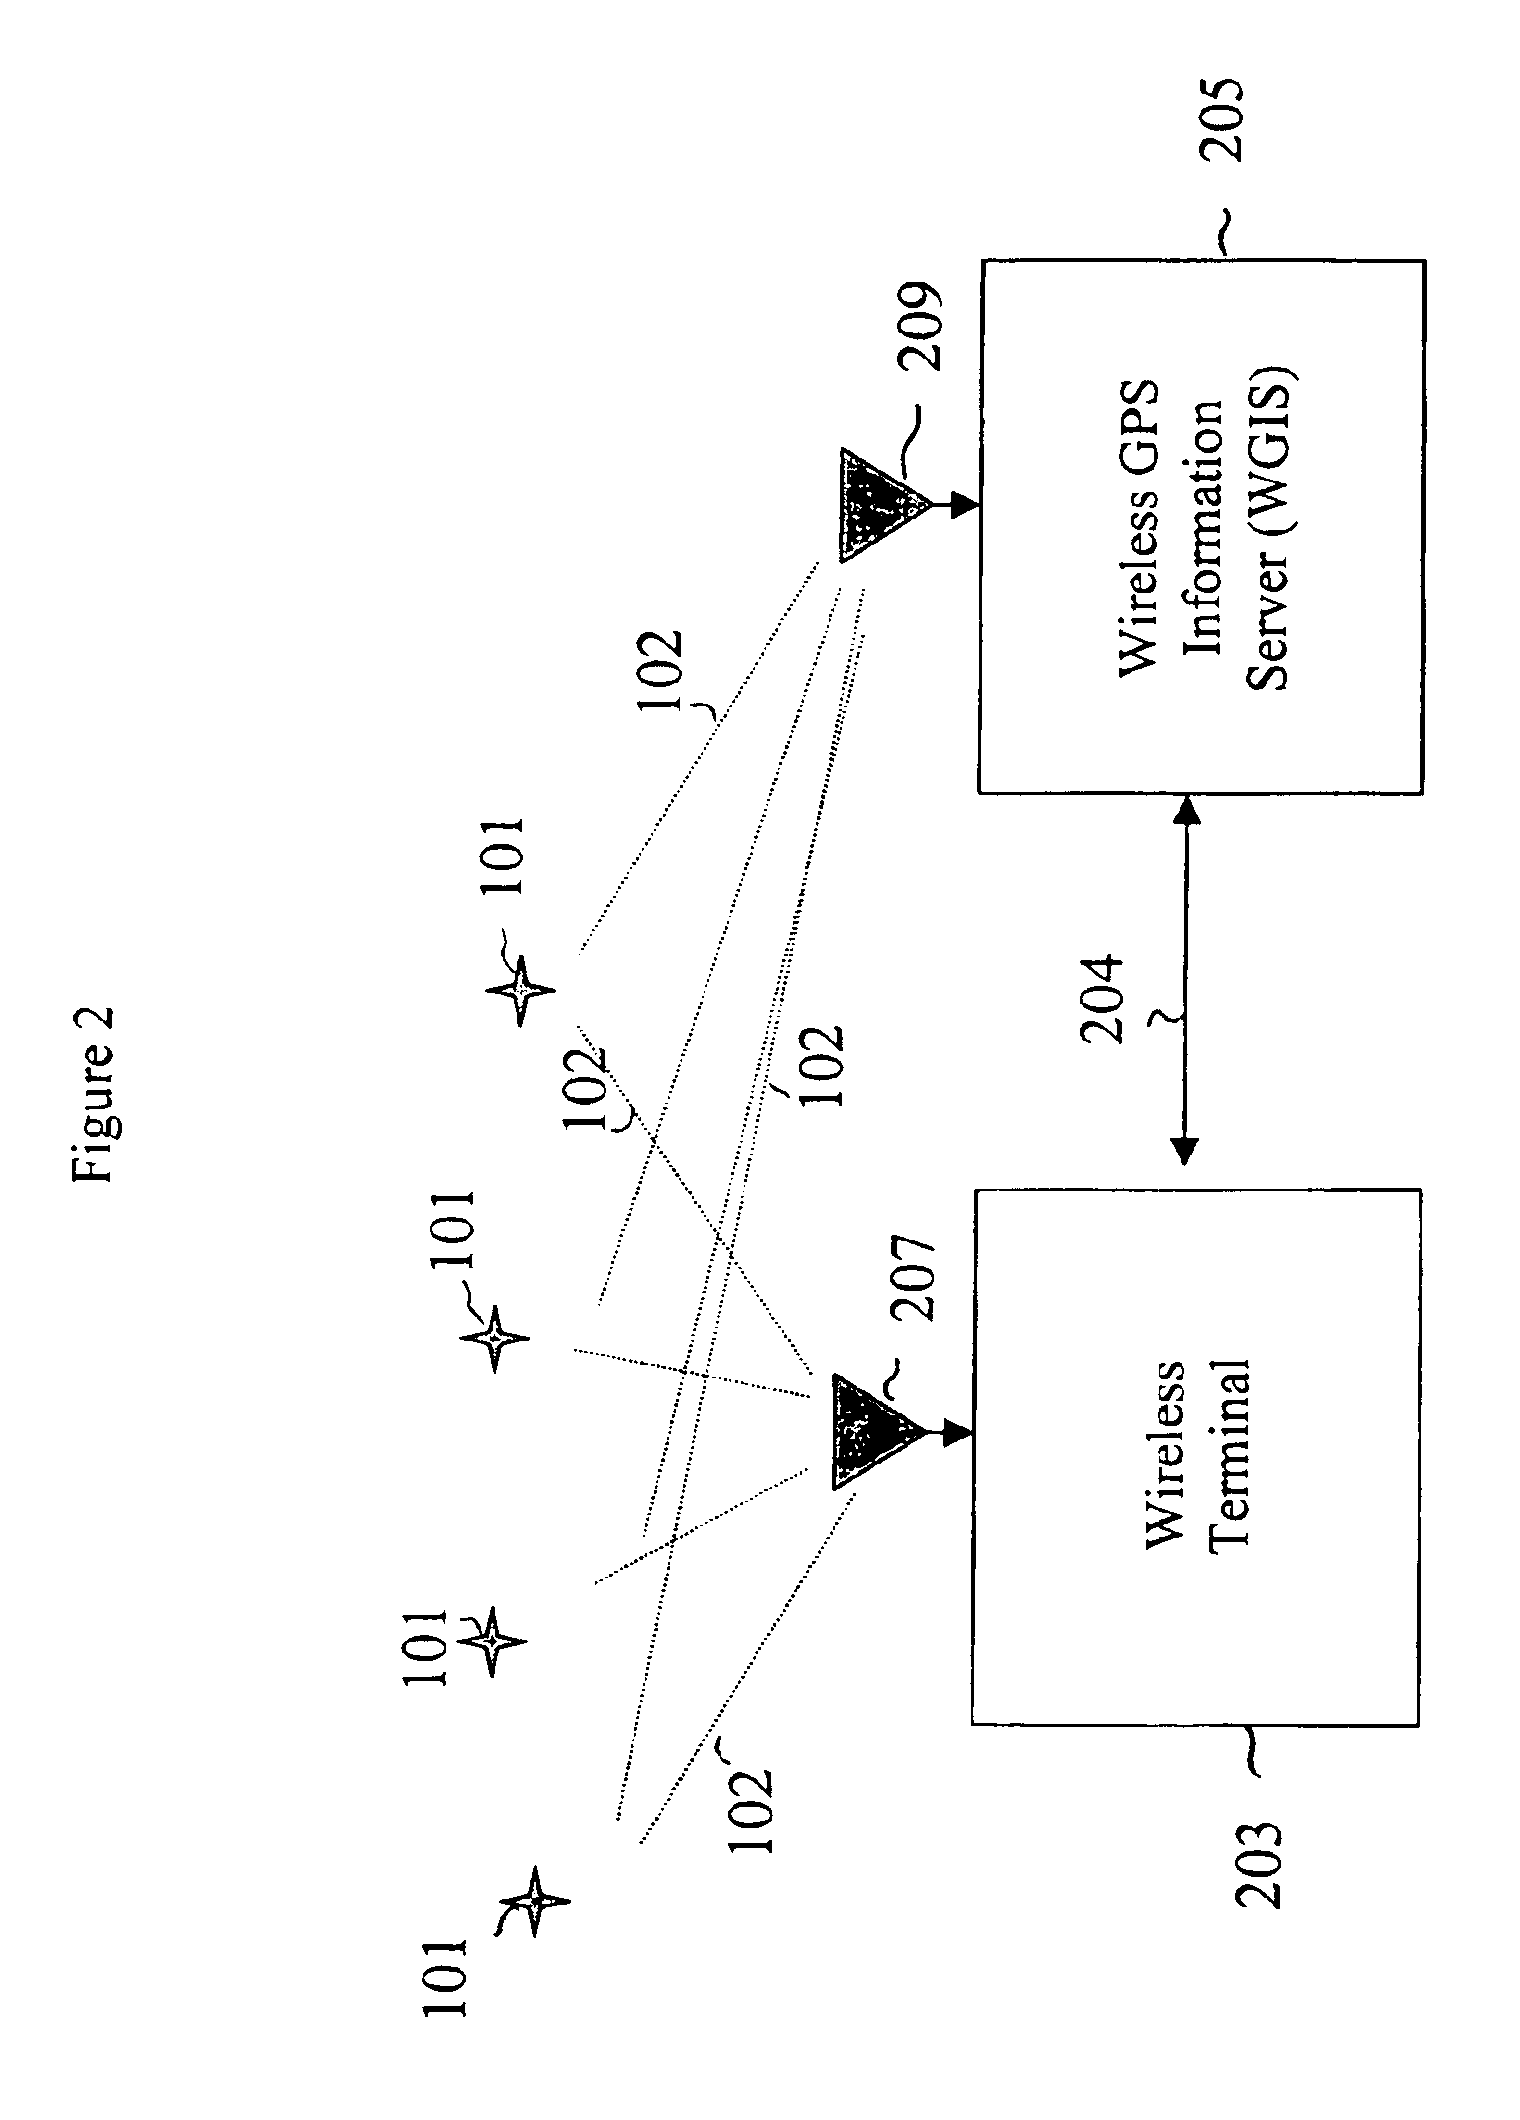 GPS signal acquisition based on frequency-domain and time-domain processing